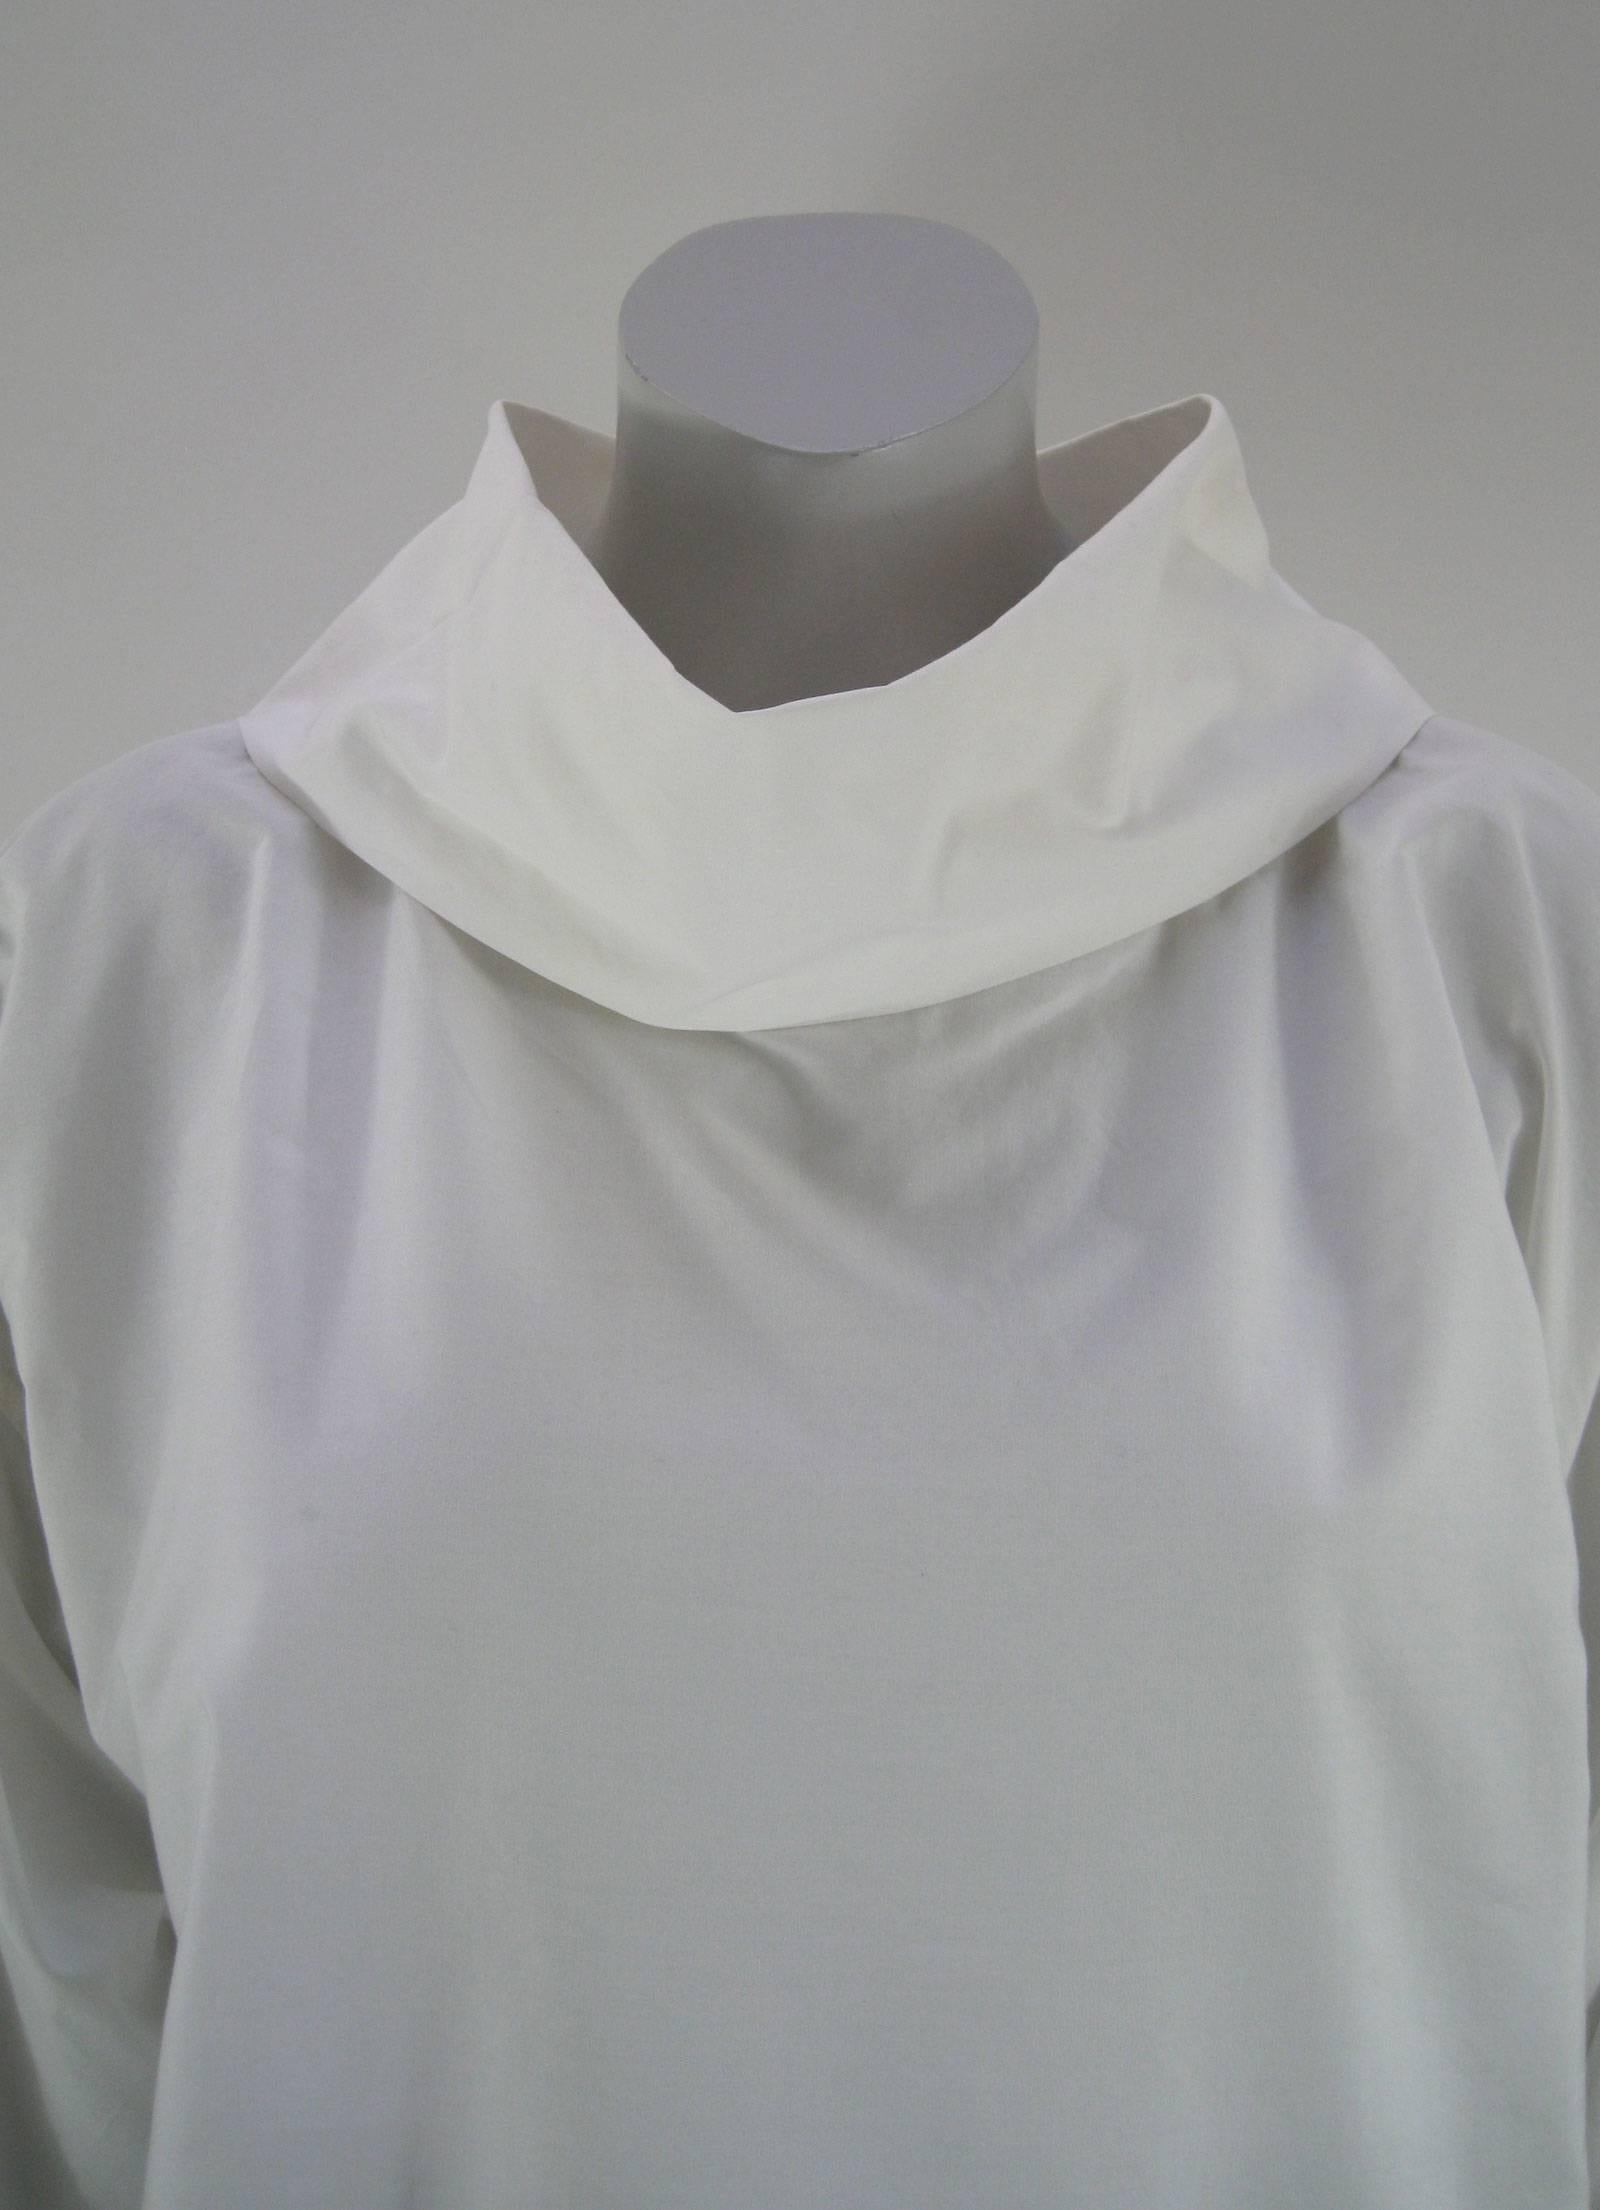 Crisp white cotton Issey Miyake Plantation shirt.
Loose fitting, unisex.
Pull over. No closures.
Long loose sleeve.
Large slouchy collar can be worn folded or straight.
No size tag found. 

